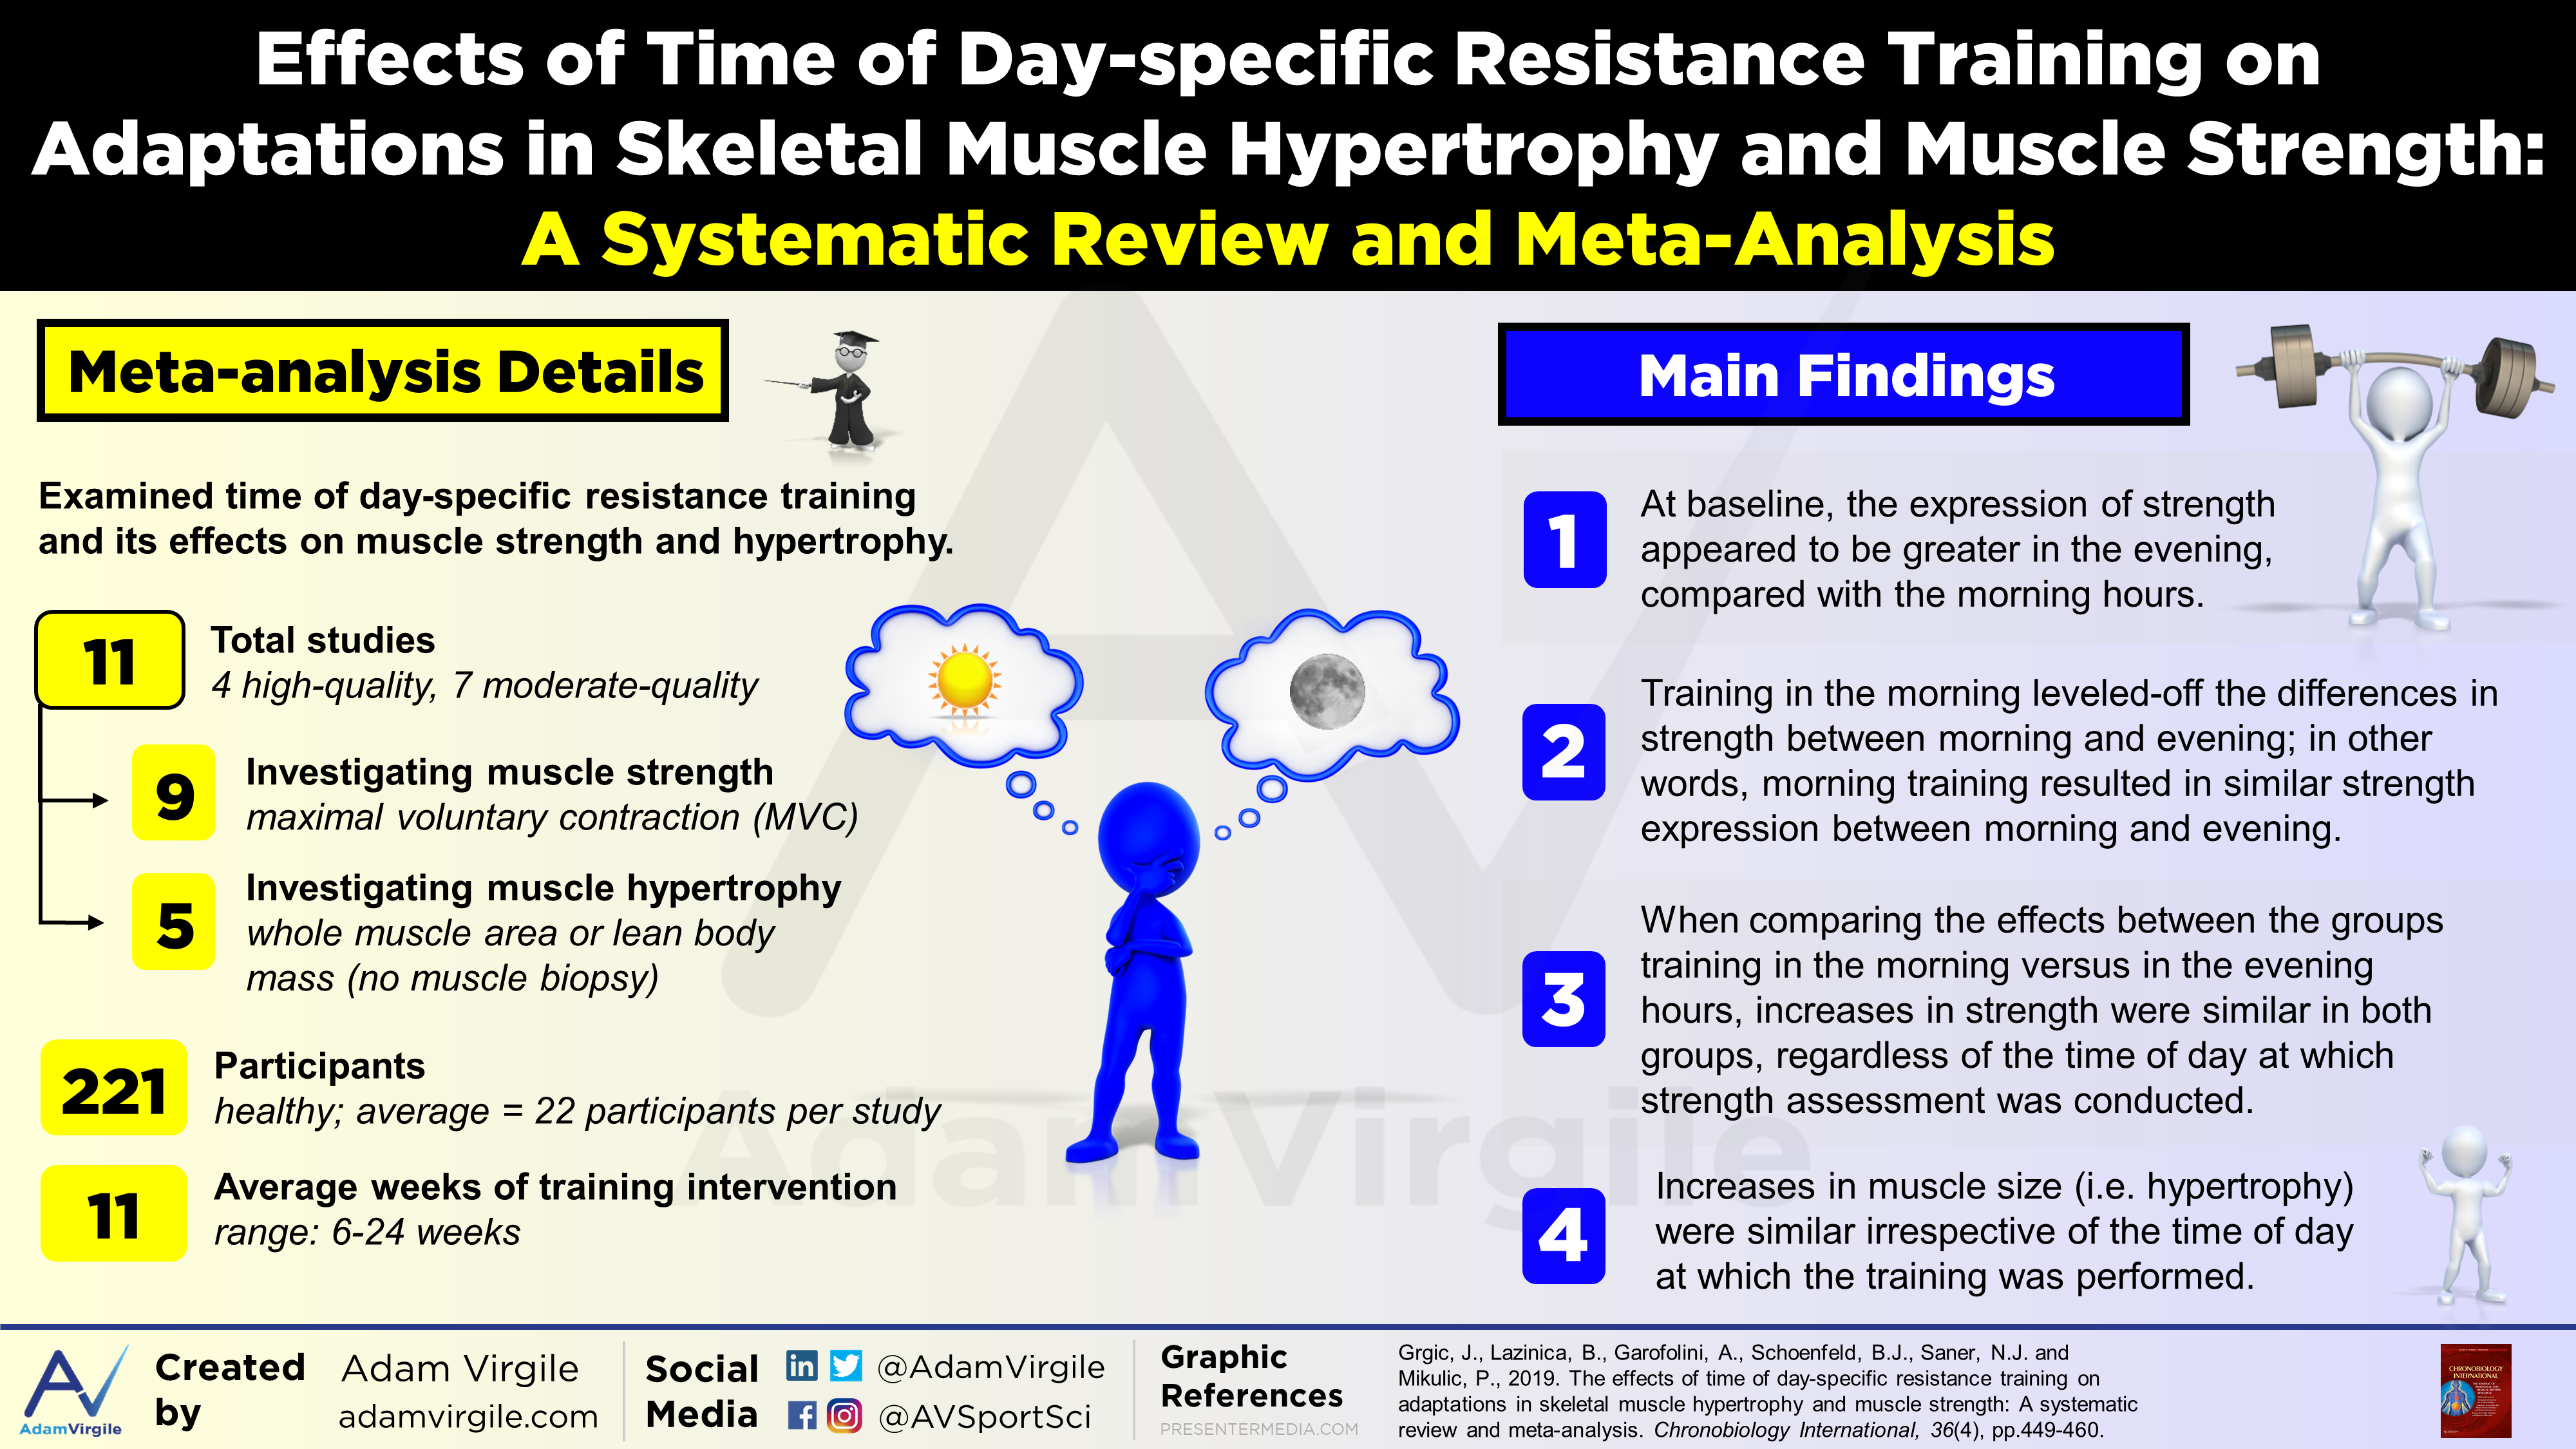 You are currently viewing Effects of Time of Day-specific Resistance Training on Adaptations in Skeletal Muscle Hypertrophy and Muscle Strength: A Systematic Review and Meta-Analysis